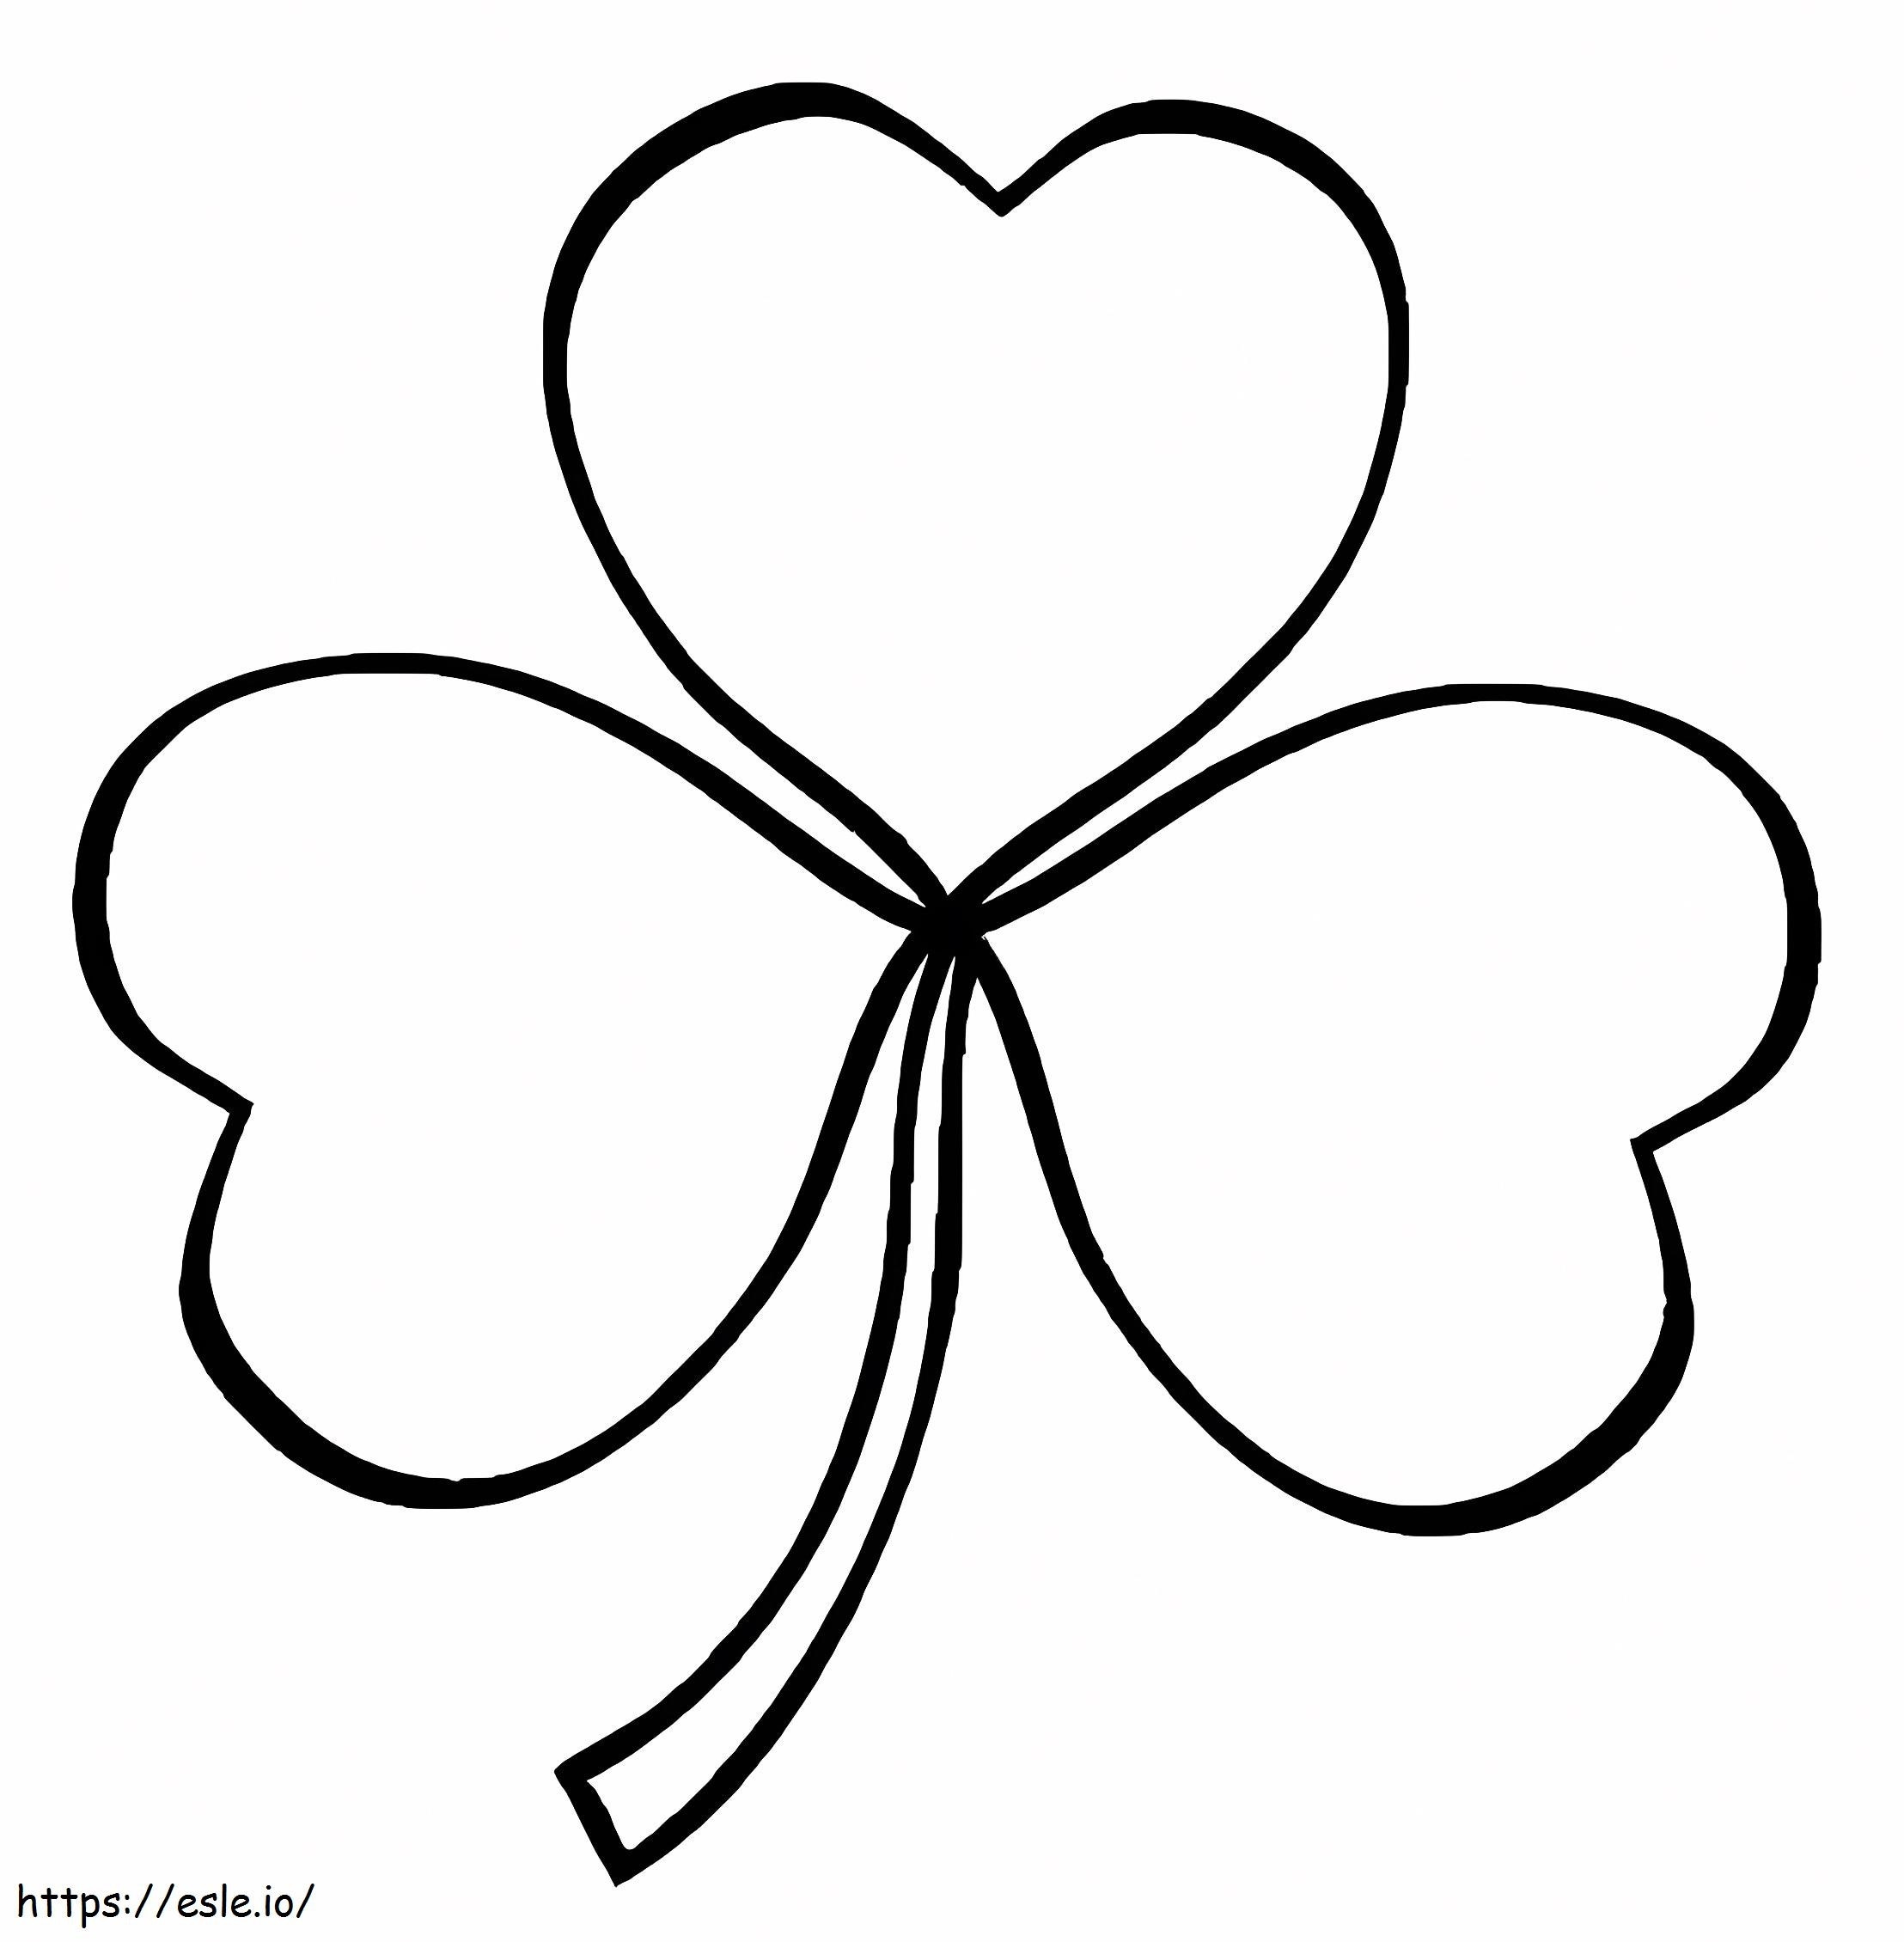 Clover Drawing coloring page